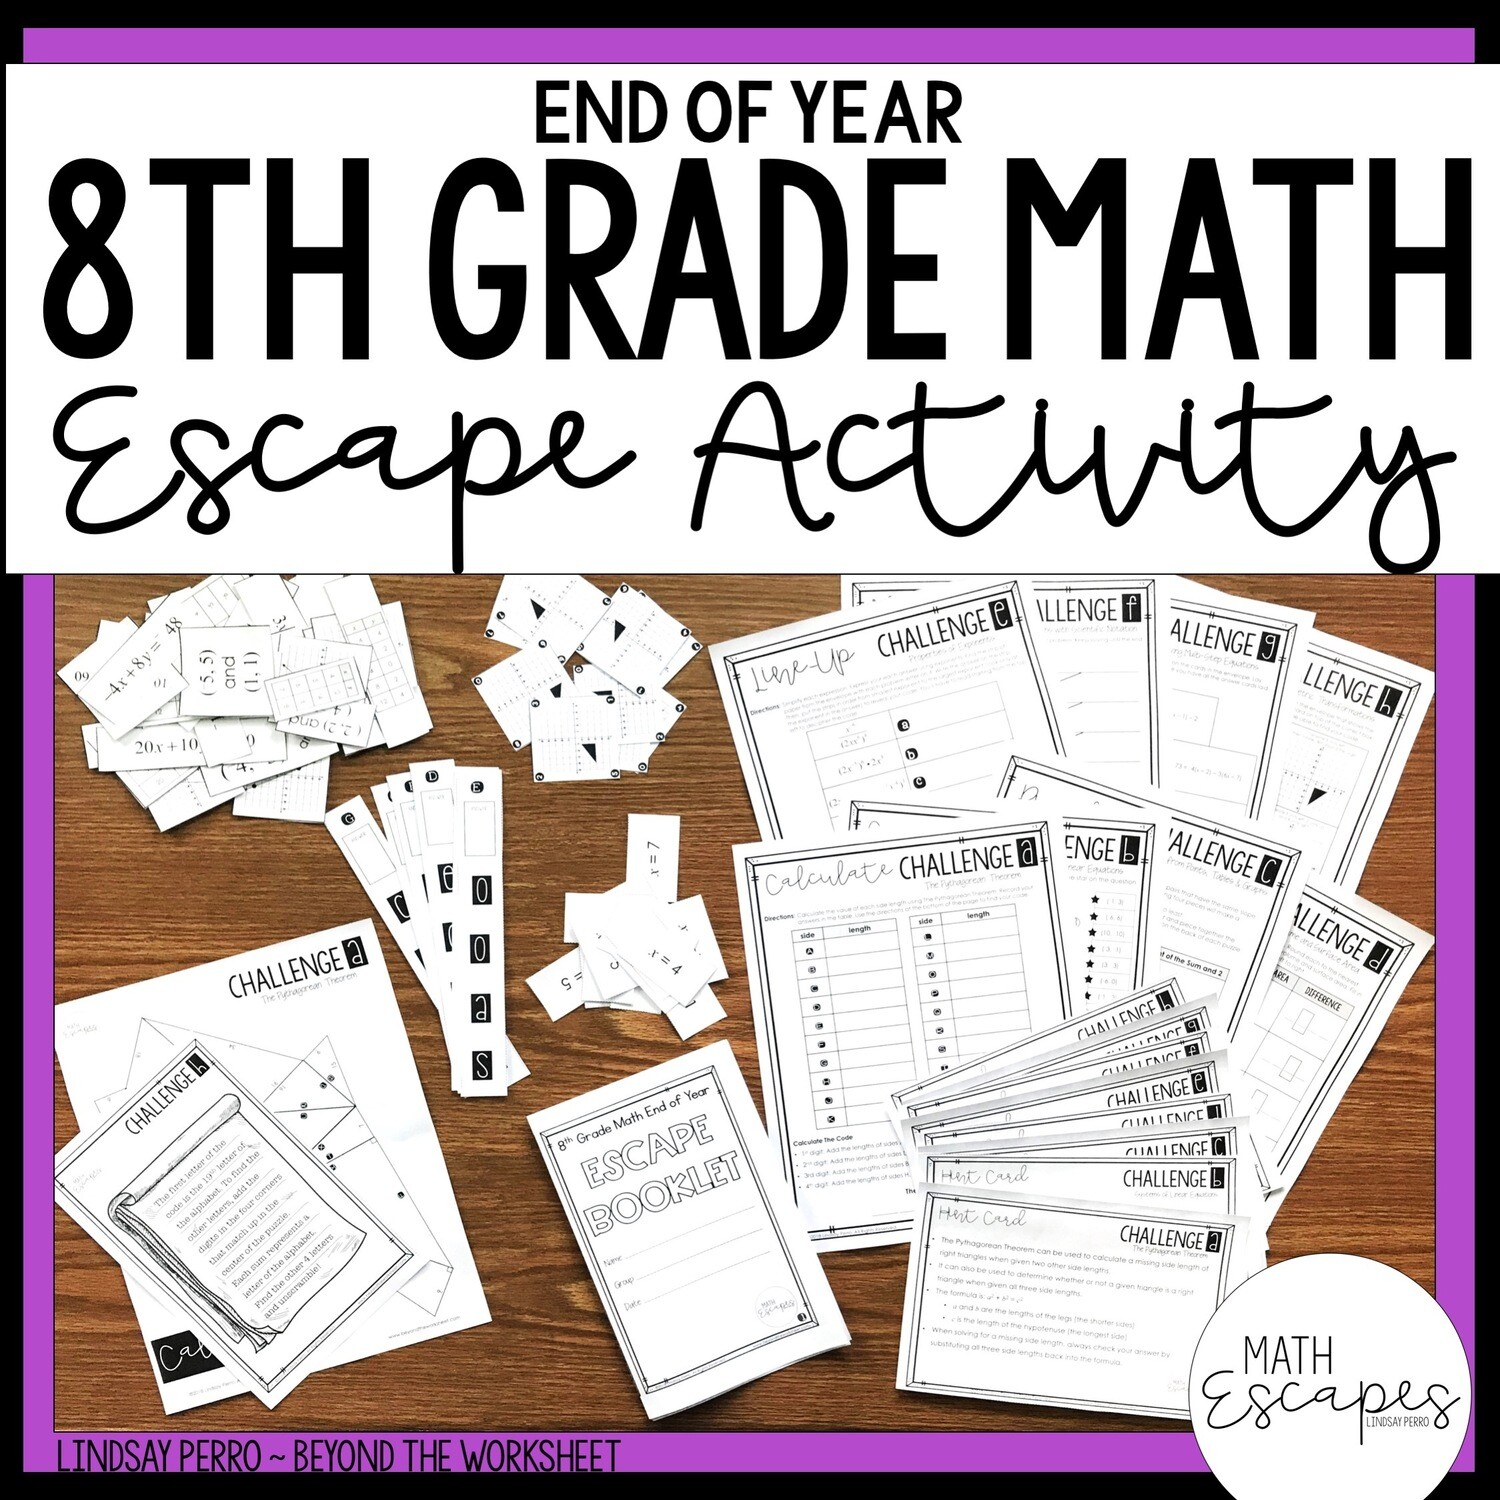 8th Grade Math End Of Year Escape Room Activity